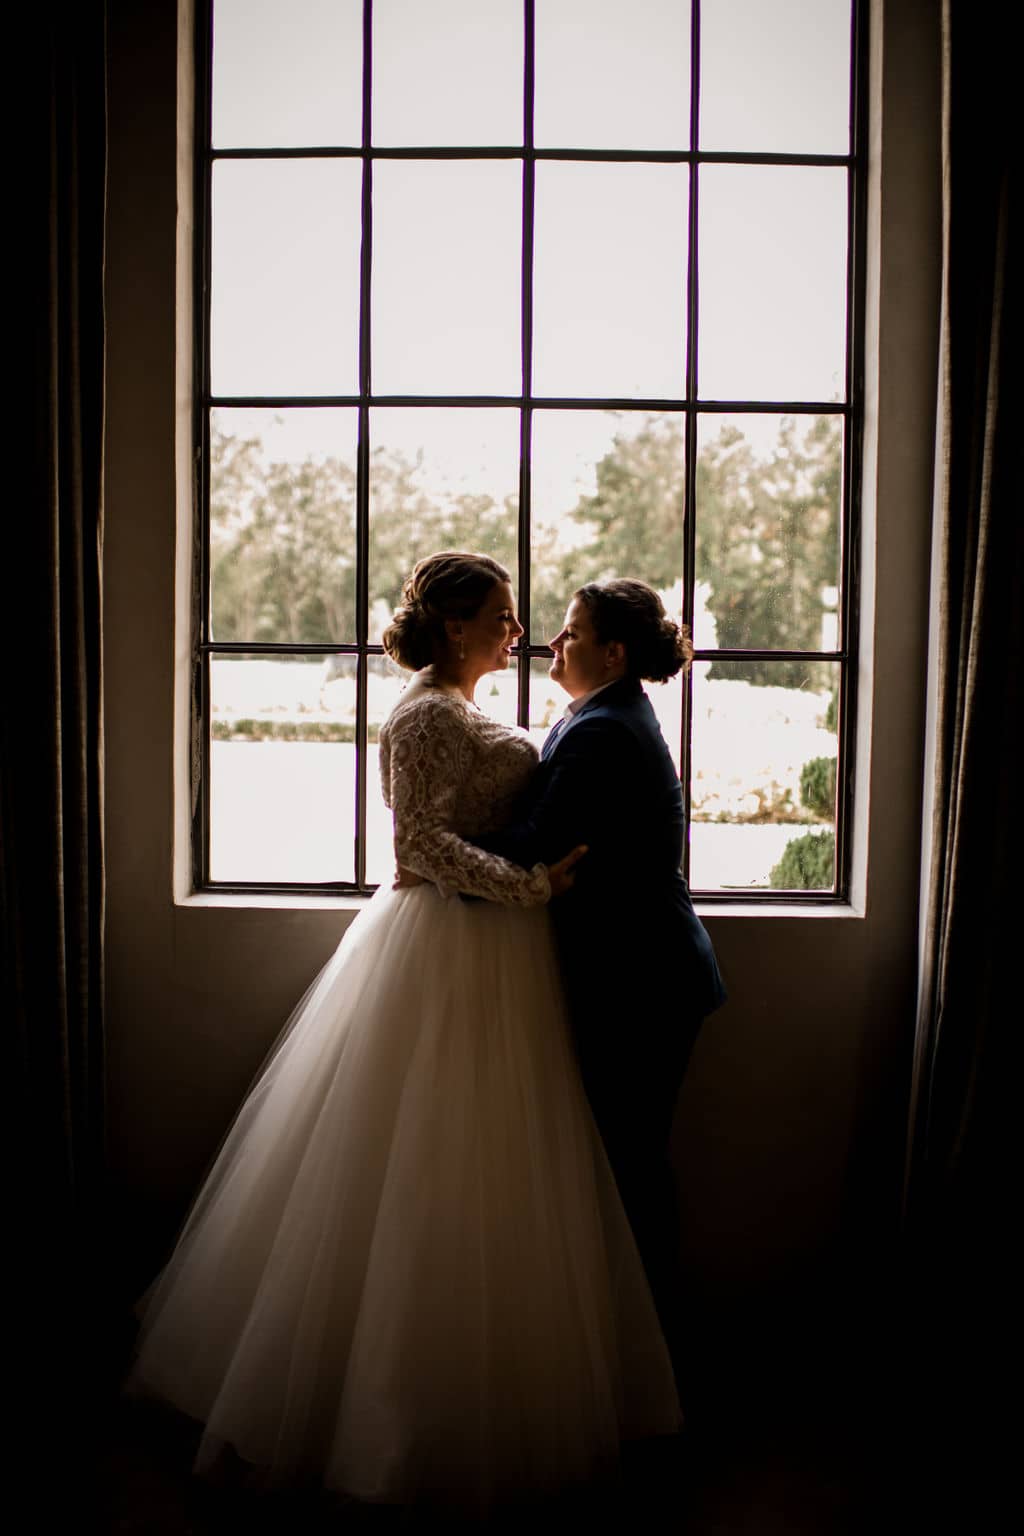 two brides silhouetted in front of the window at a bryan-college station wedding venue in an silhouette